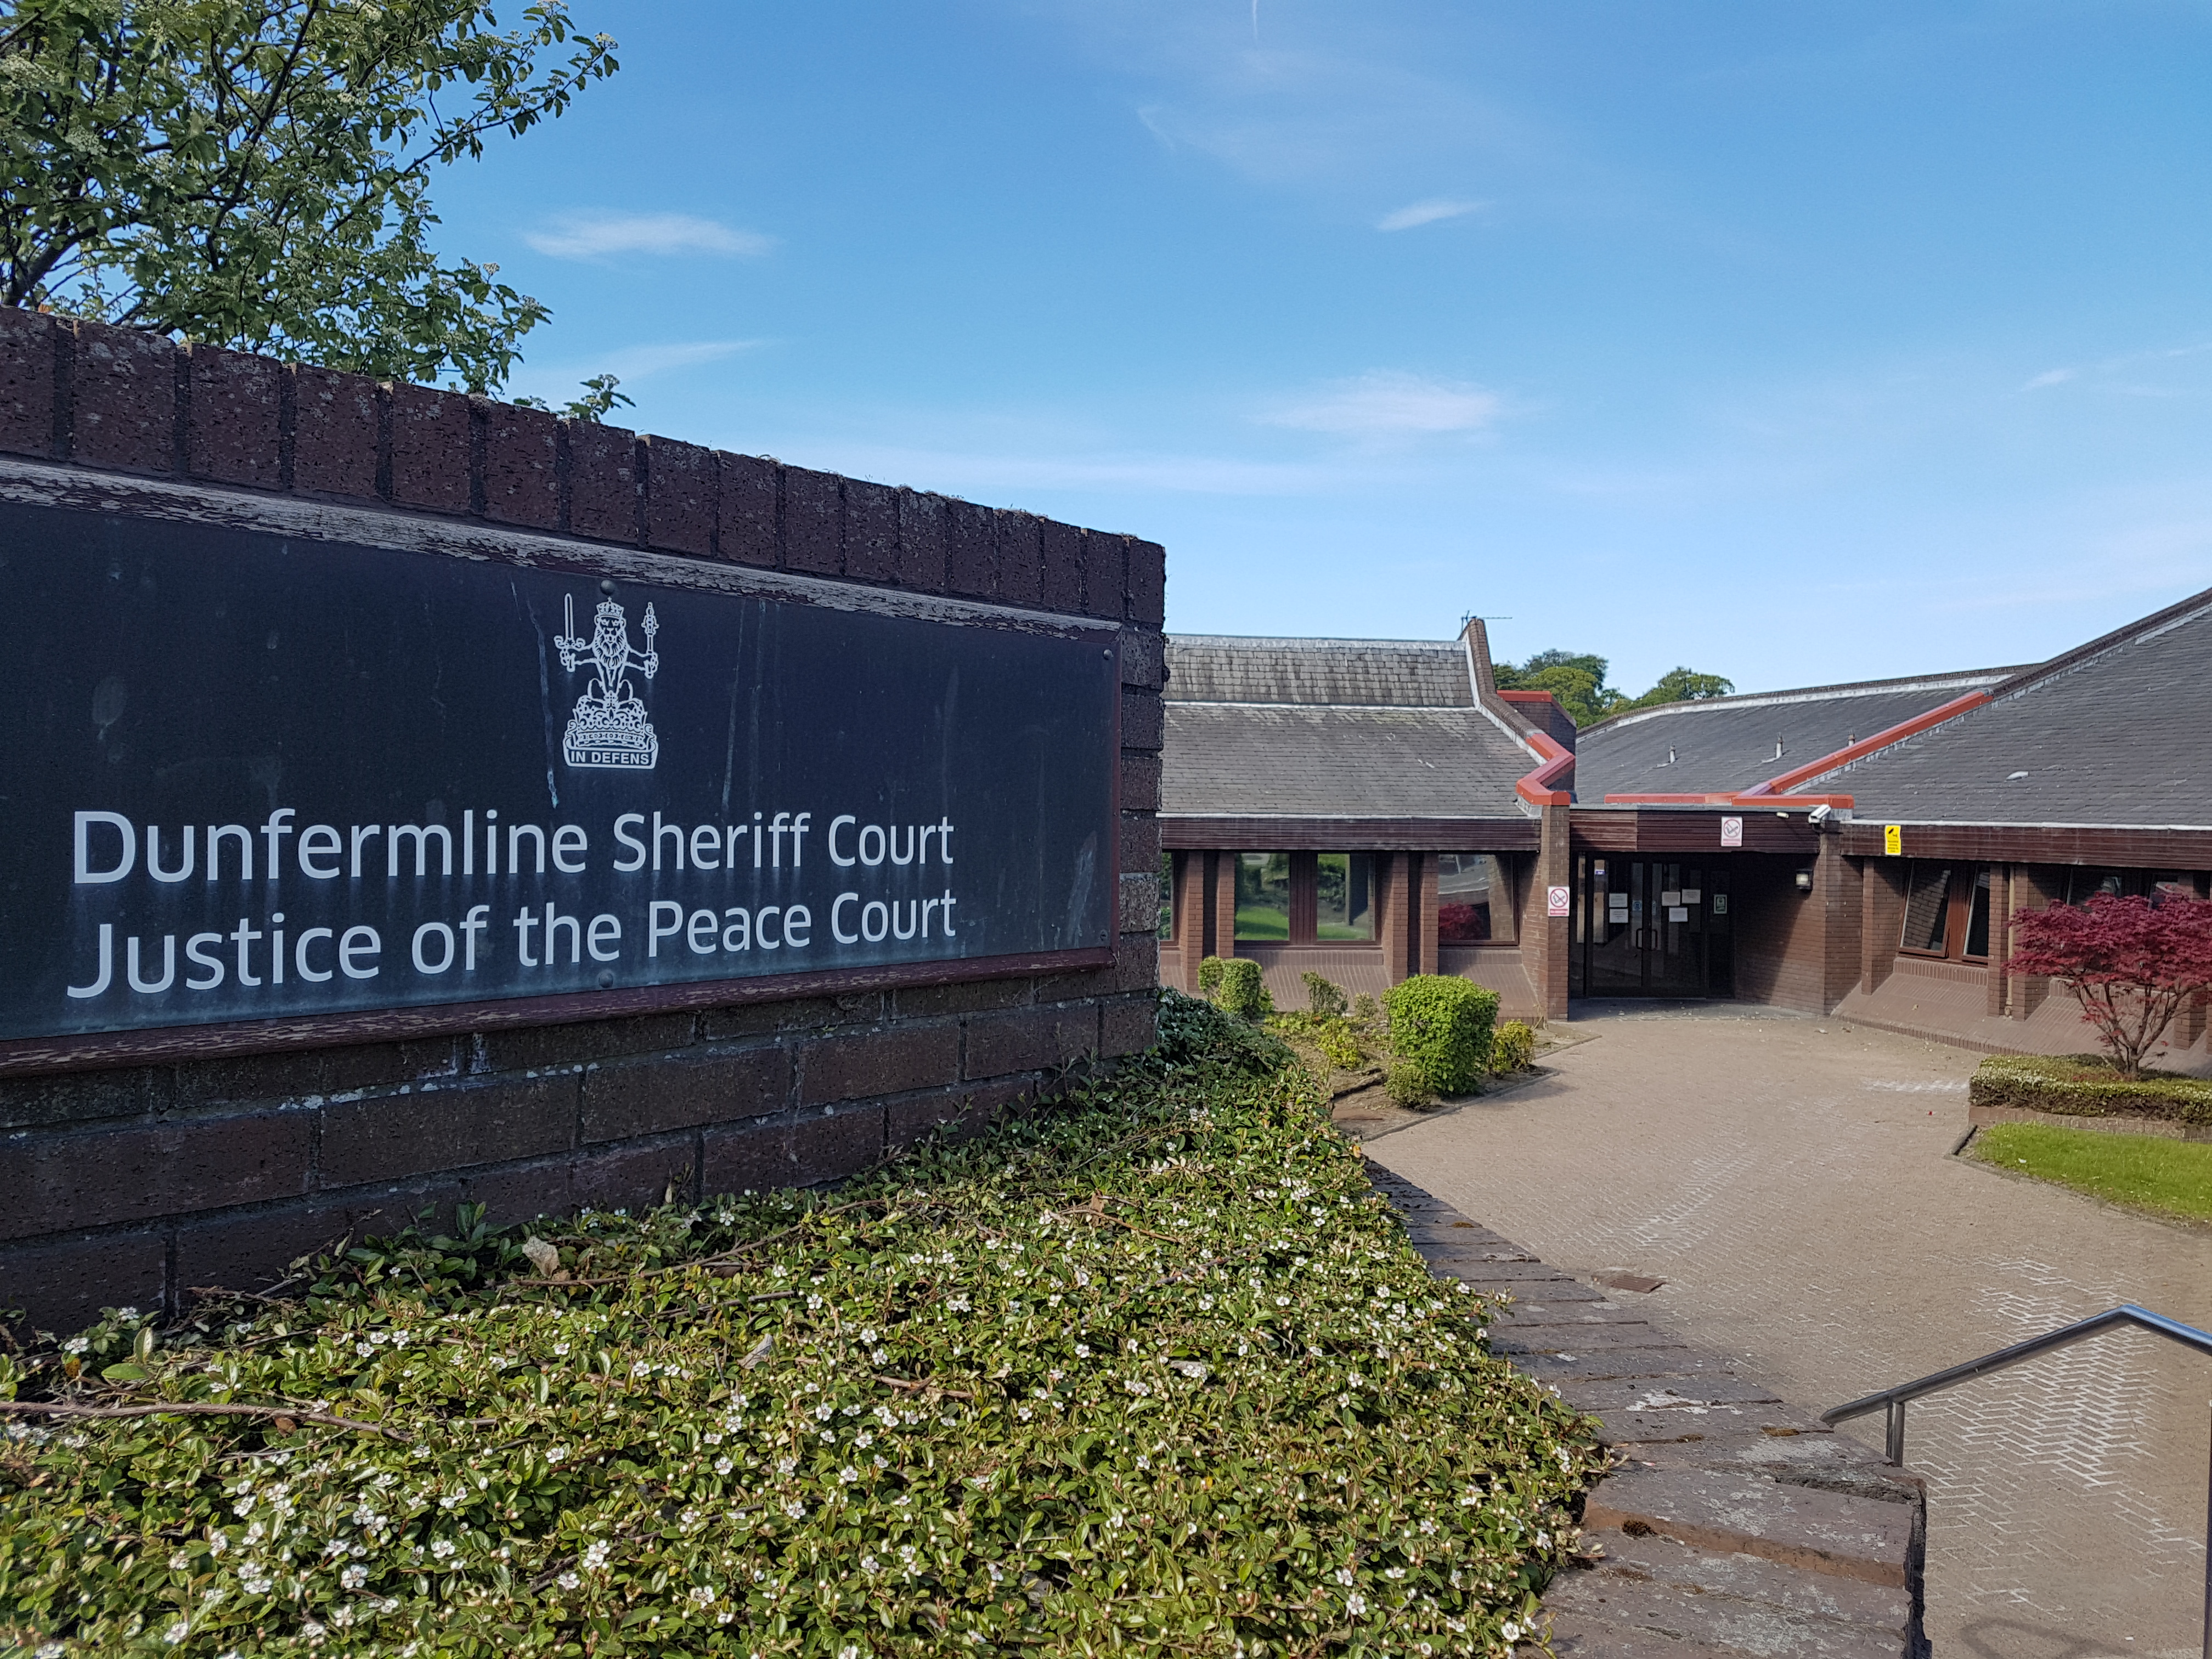 image of Dunfermline Sheriff Court and Justice of the Peace Court